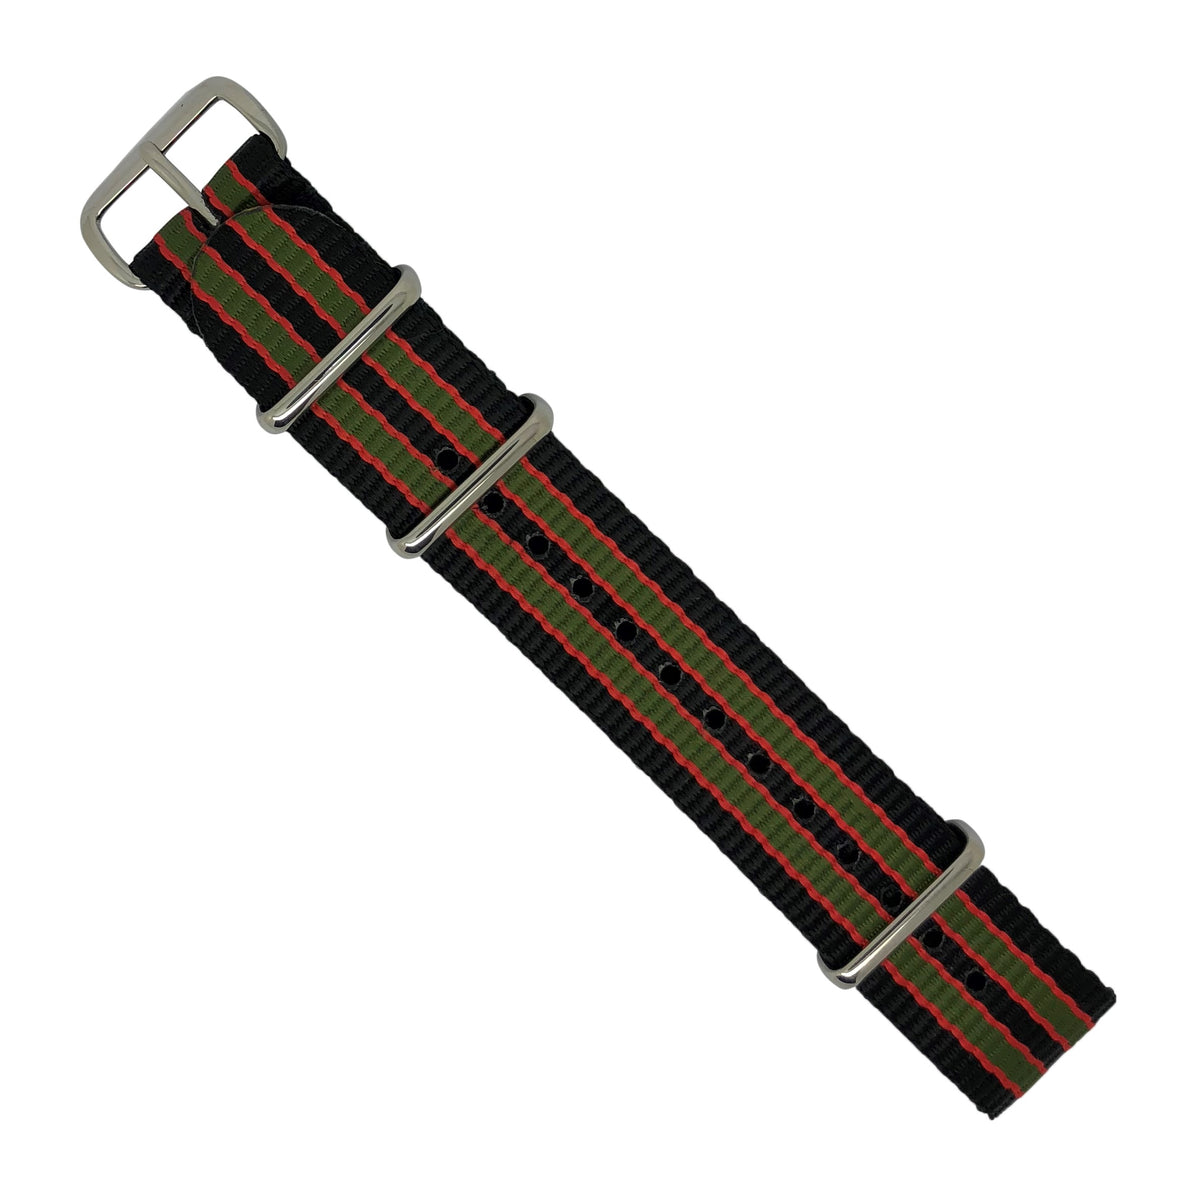 Premium Nato Strap in Black Green Red (James Bond) with Polished Silver Buckle (20mm) - Nomad watch Works